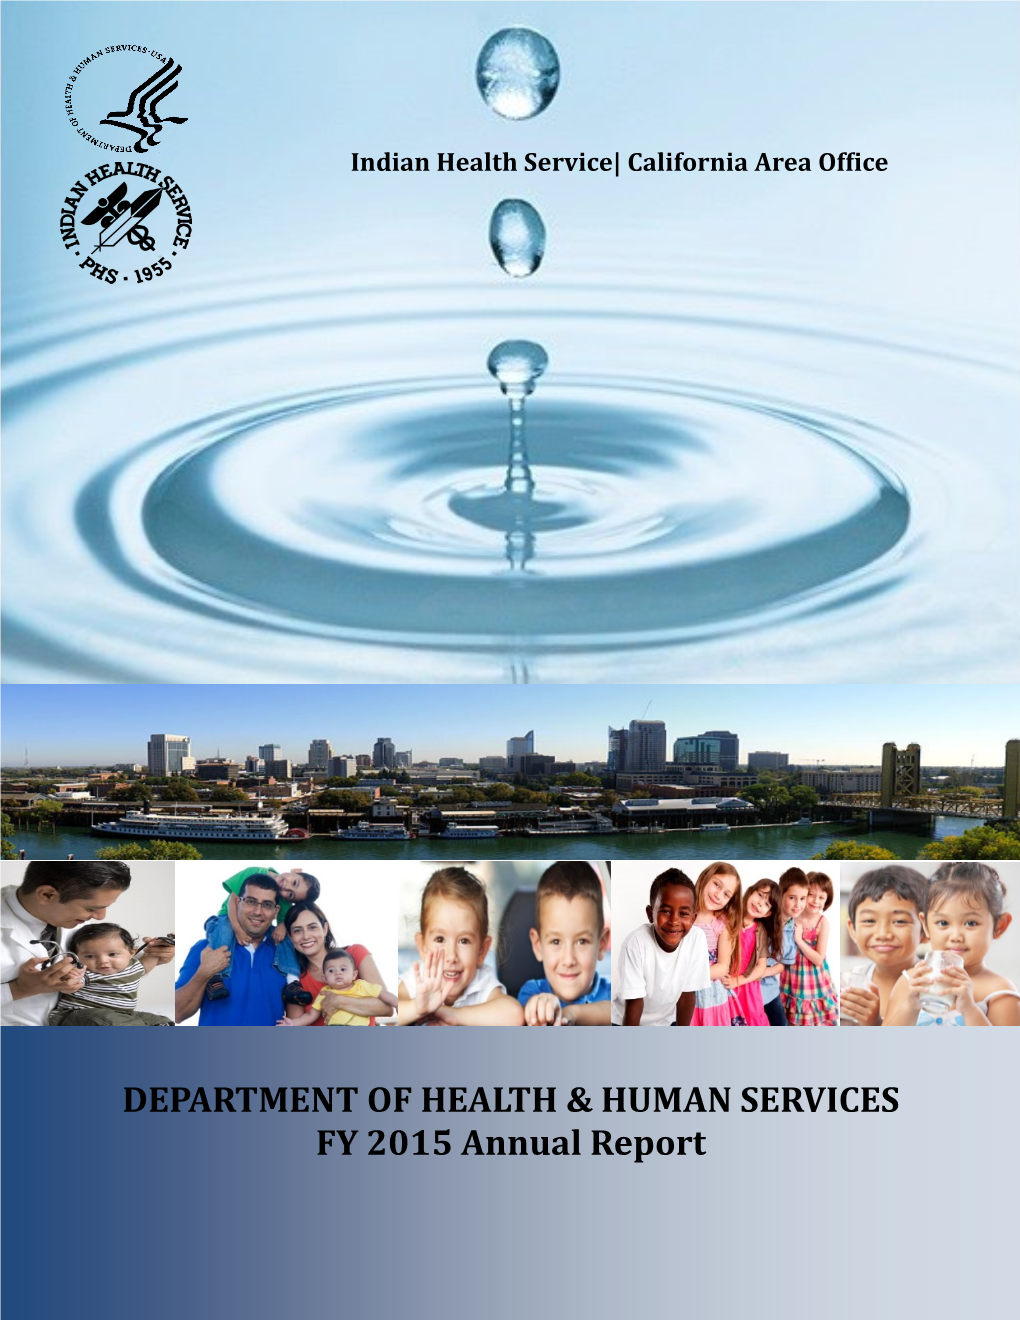 Indian Health Service California Area Office FY 2015 Annual Report